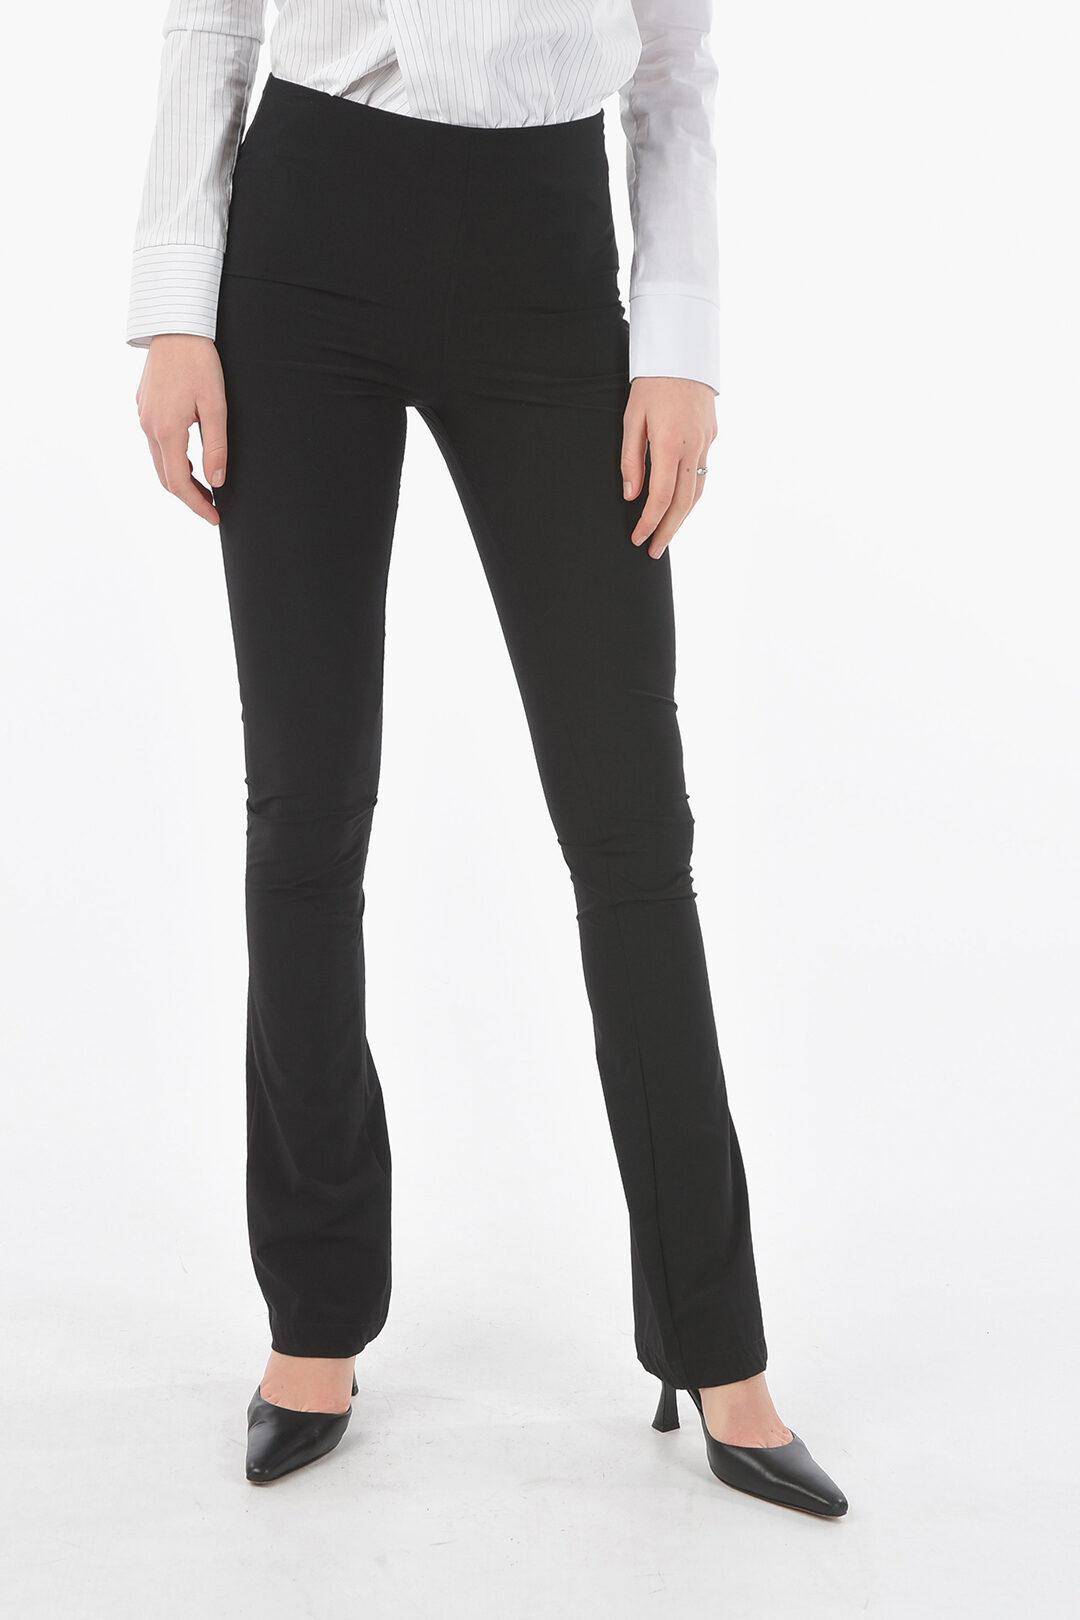 Marilyn Straight Pants Sculpt-Her™ Collection - Oxford Navy Blue | NYDJ